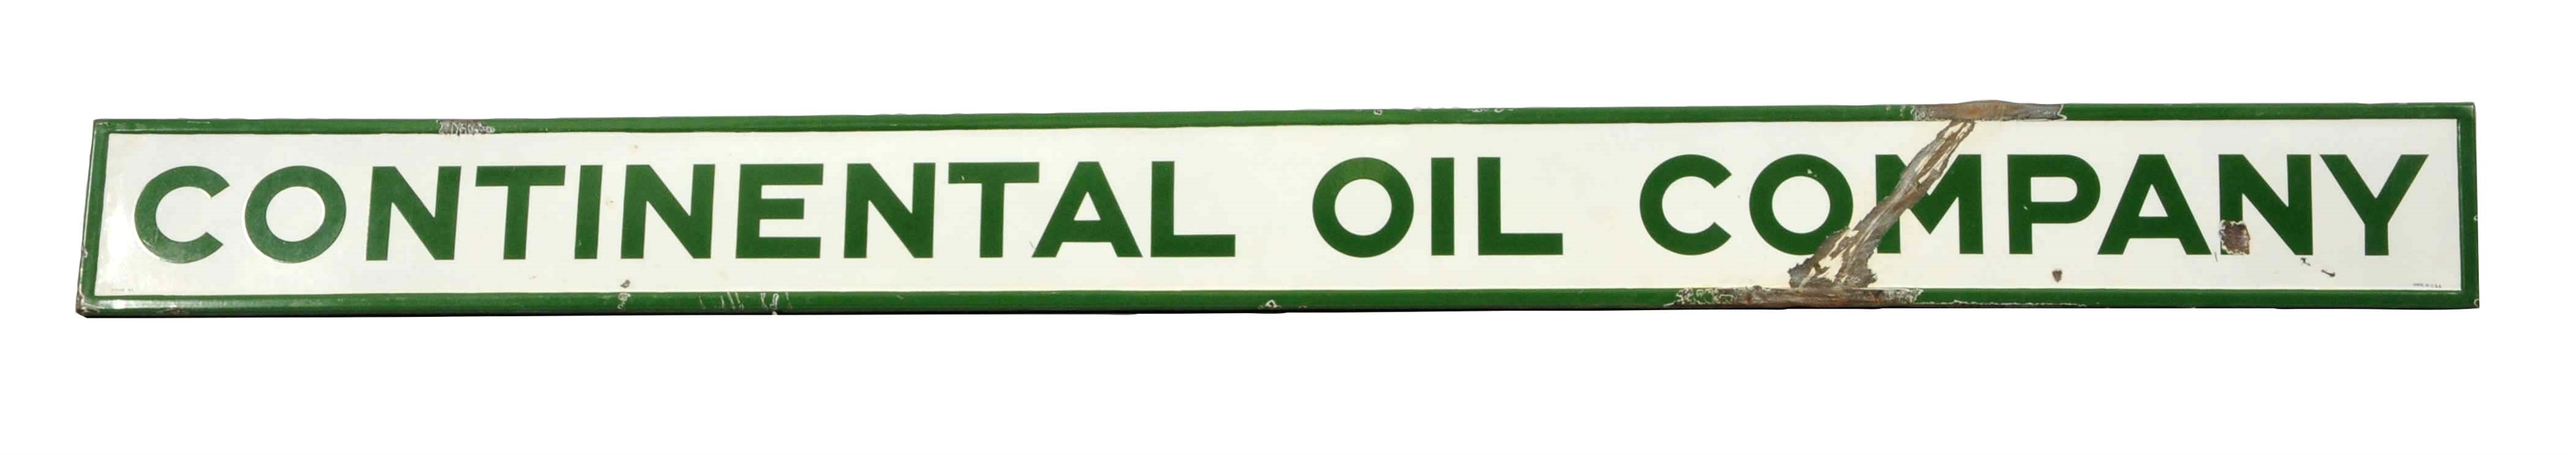 CONTINENTAL OIL COMPANY PORCELAIN SIGN.